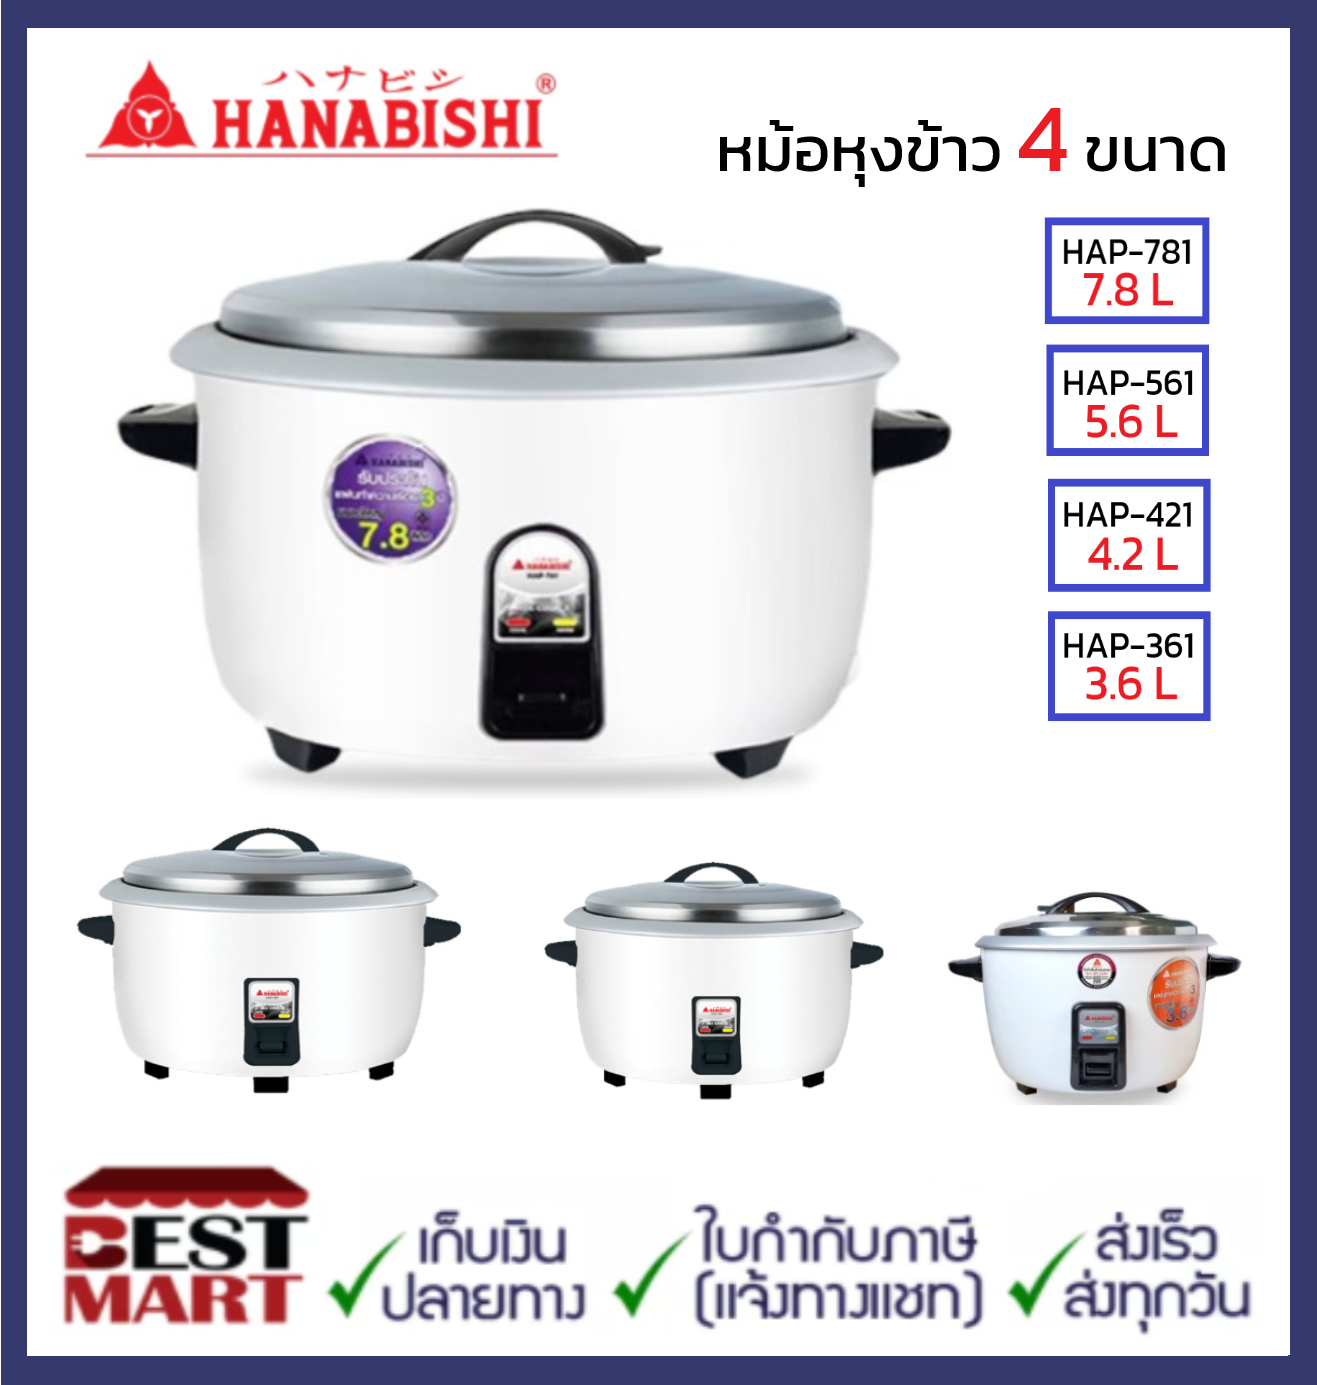 THB Sharp Commercial Big Rice Cooker 10 Liters KSH D1010 -   THB